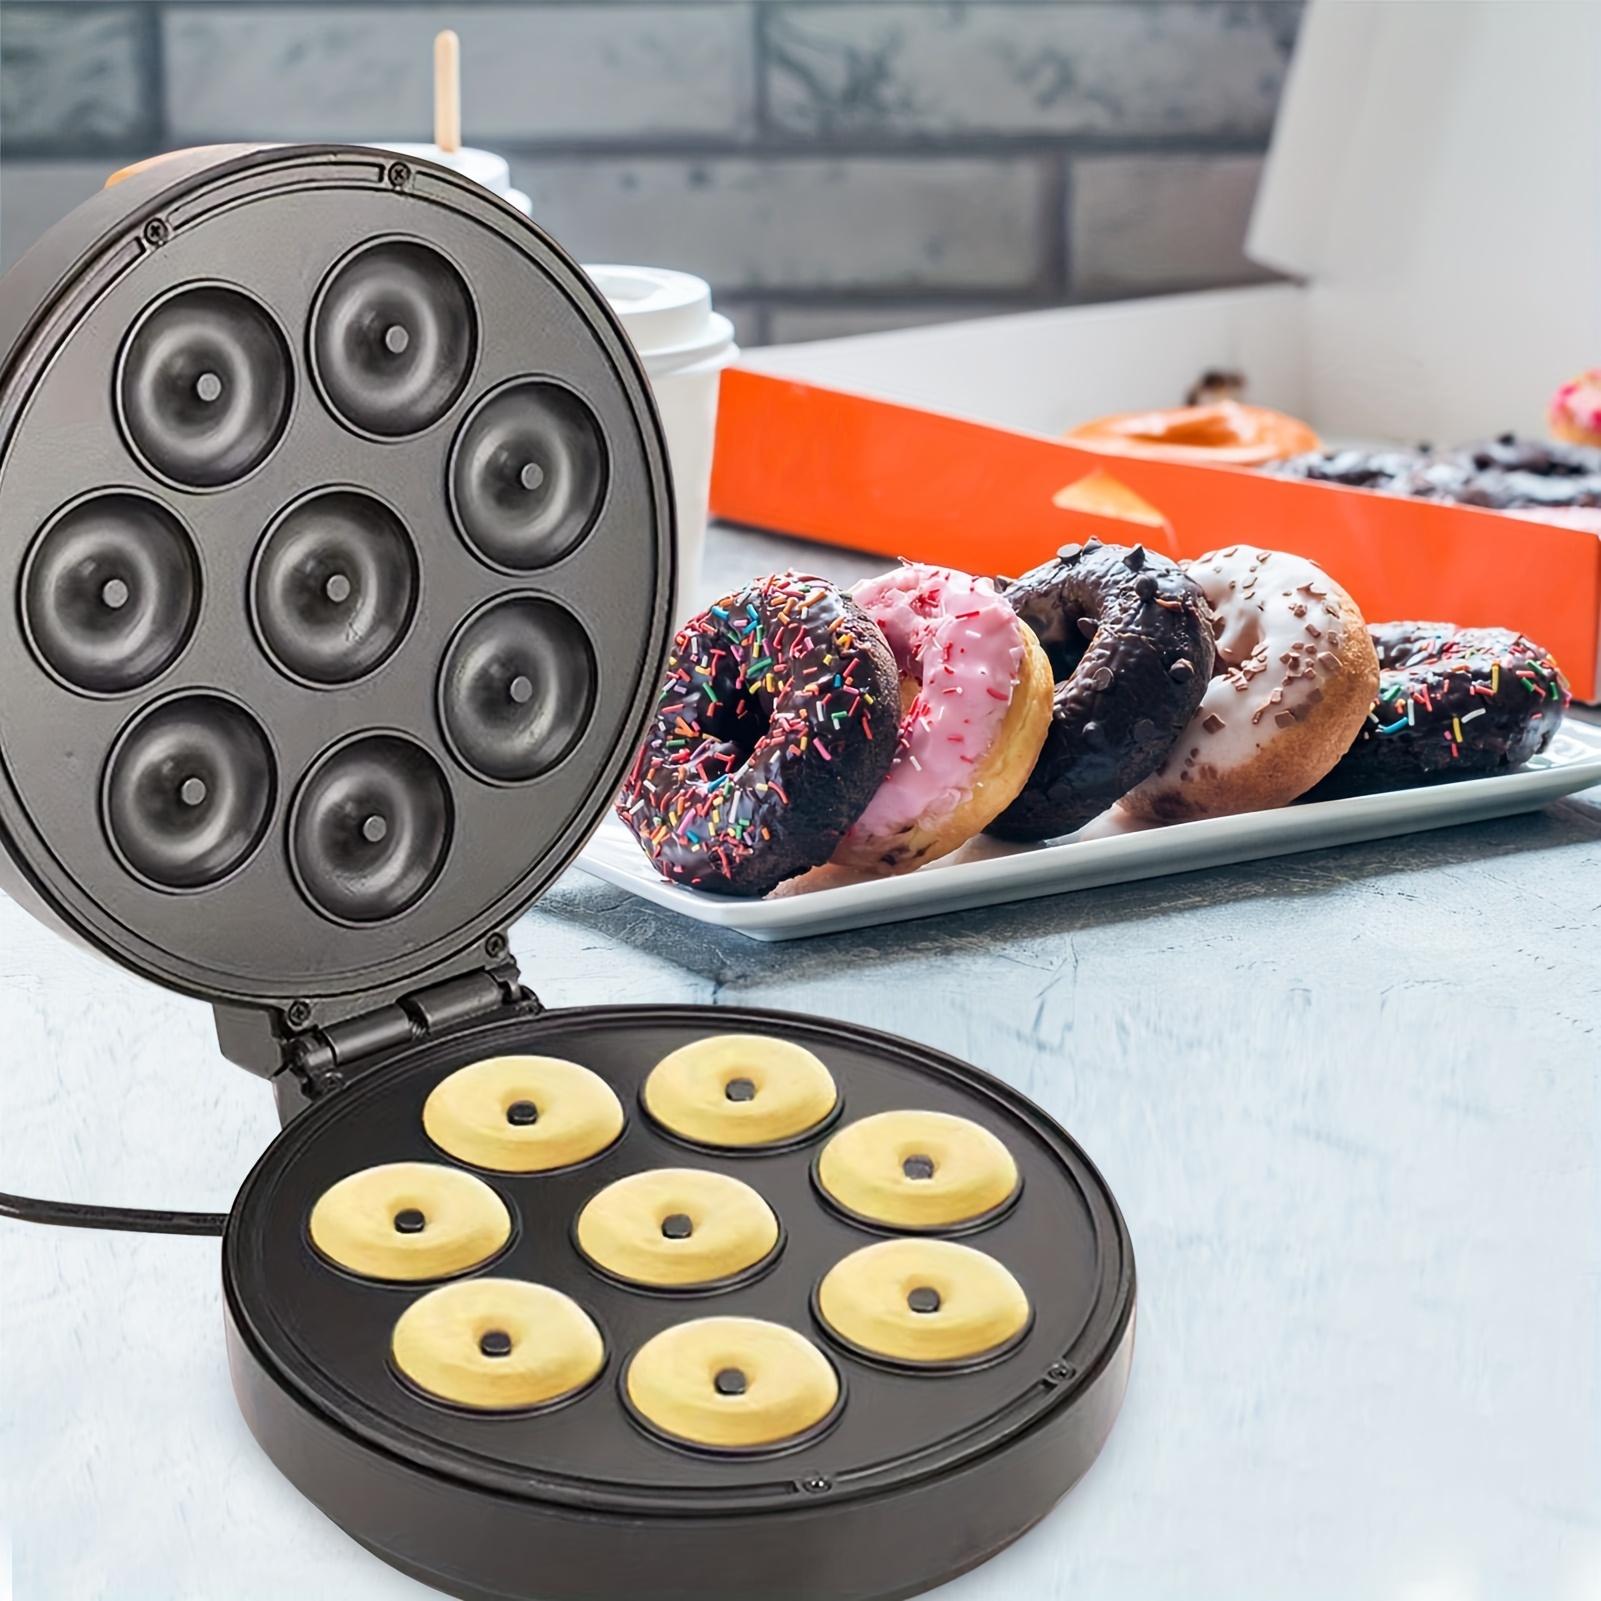 Making mini donuts in a donut maker machine. Two recipes for sweet